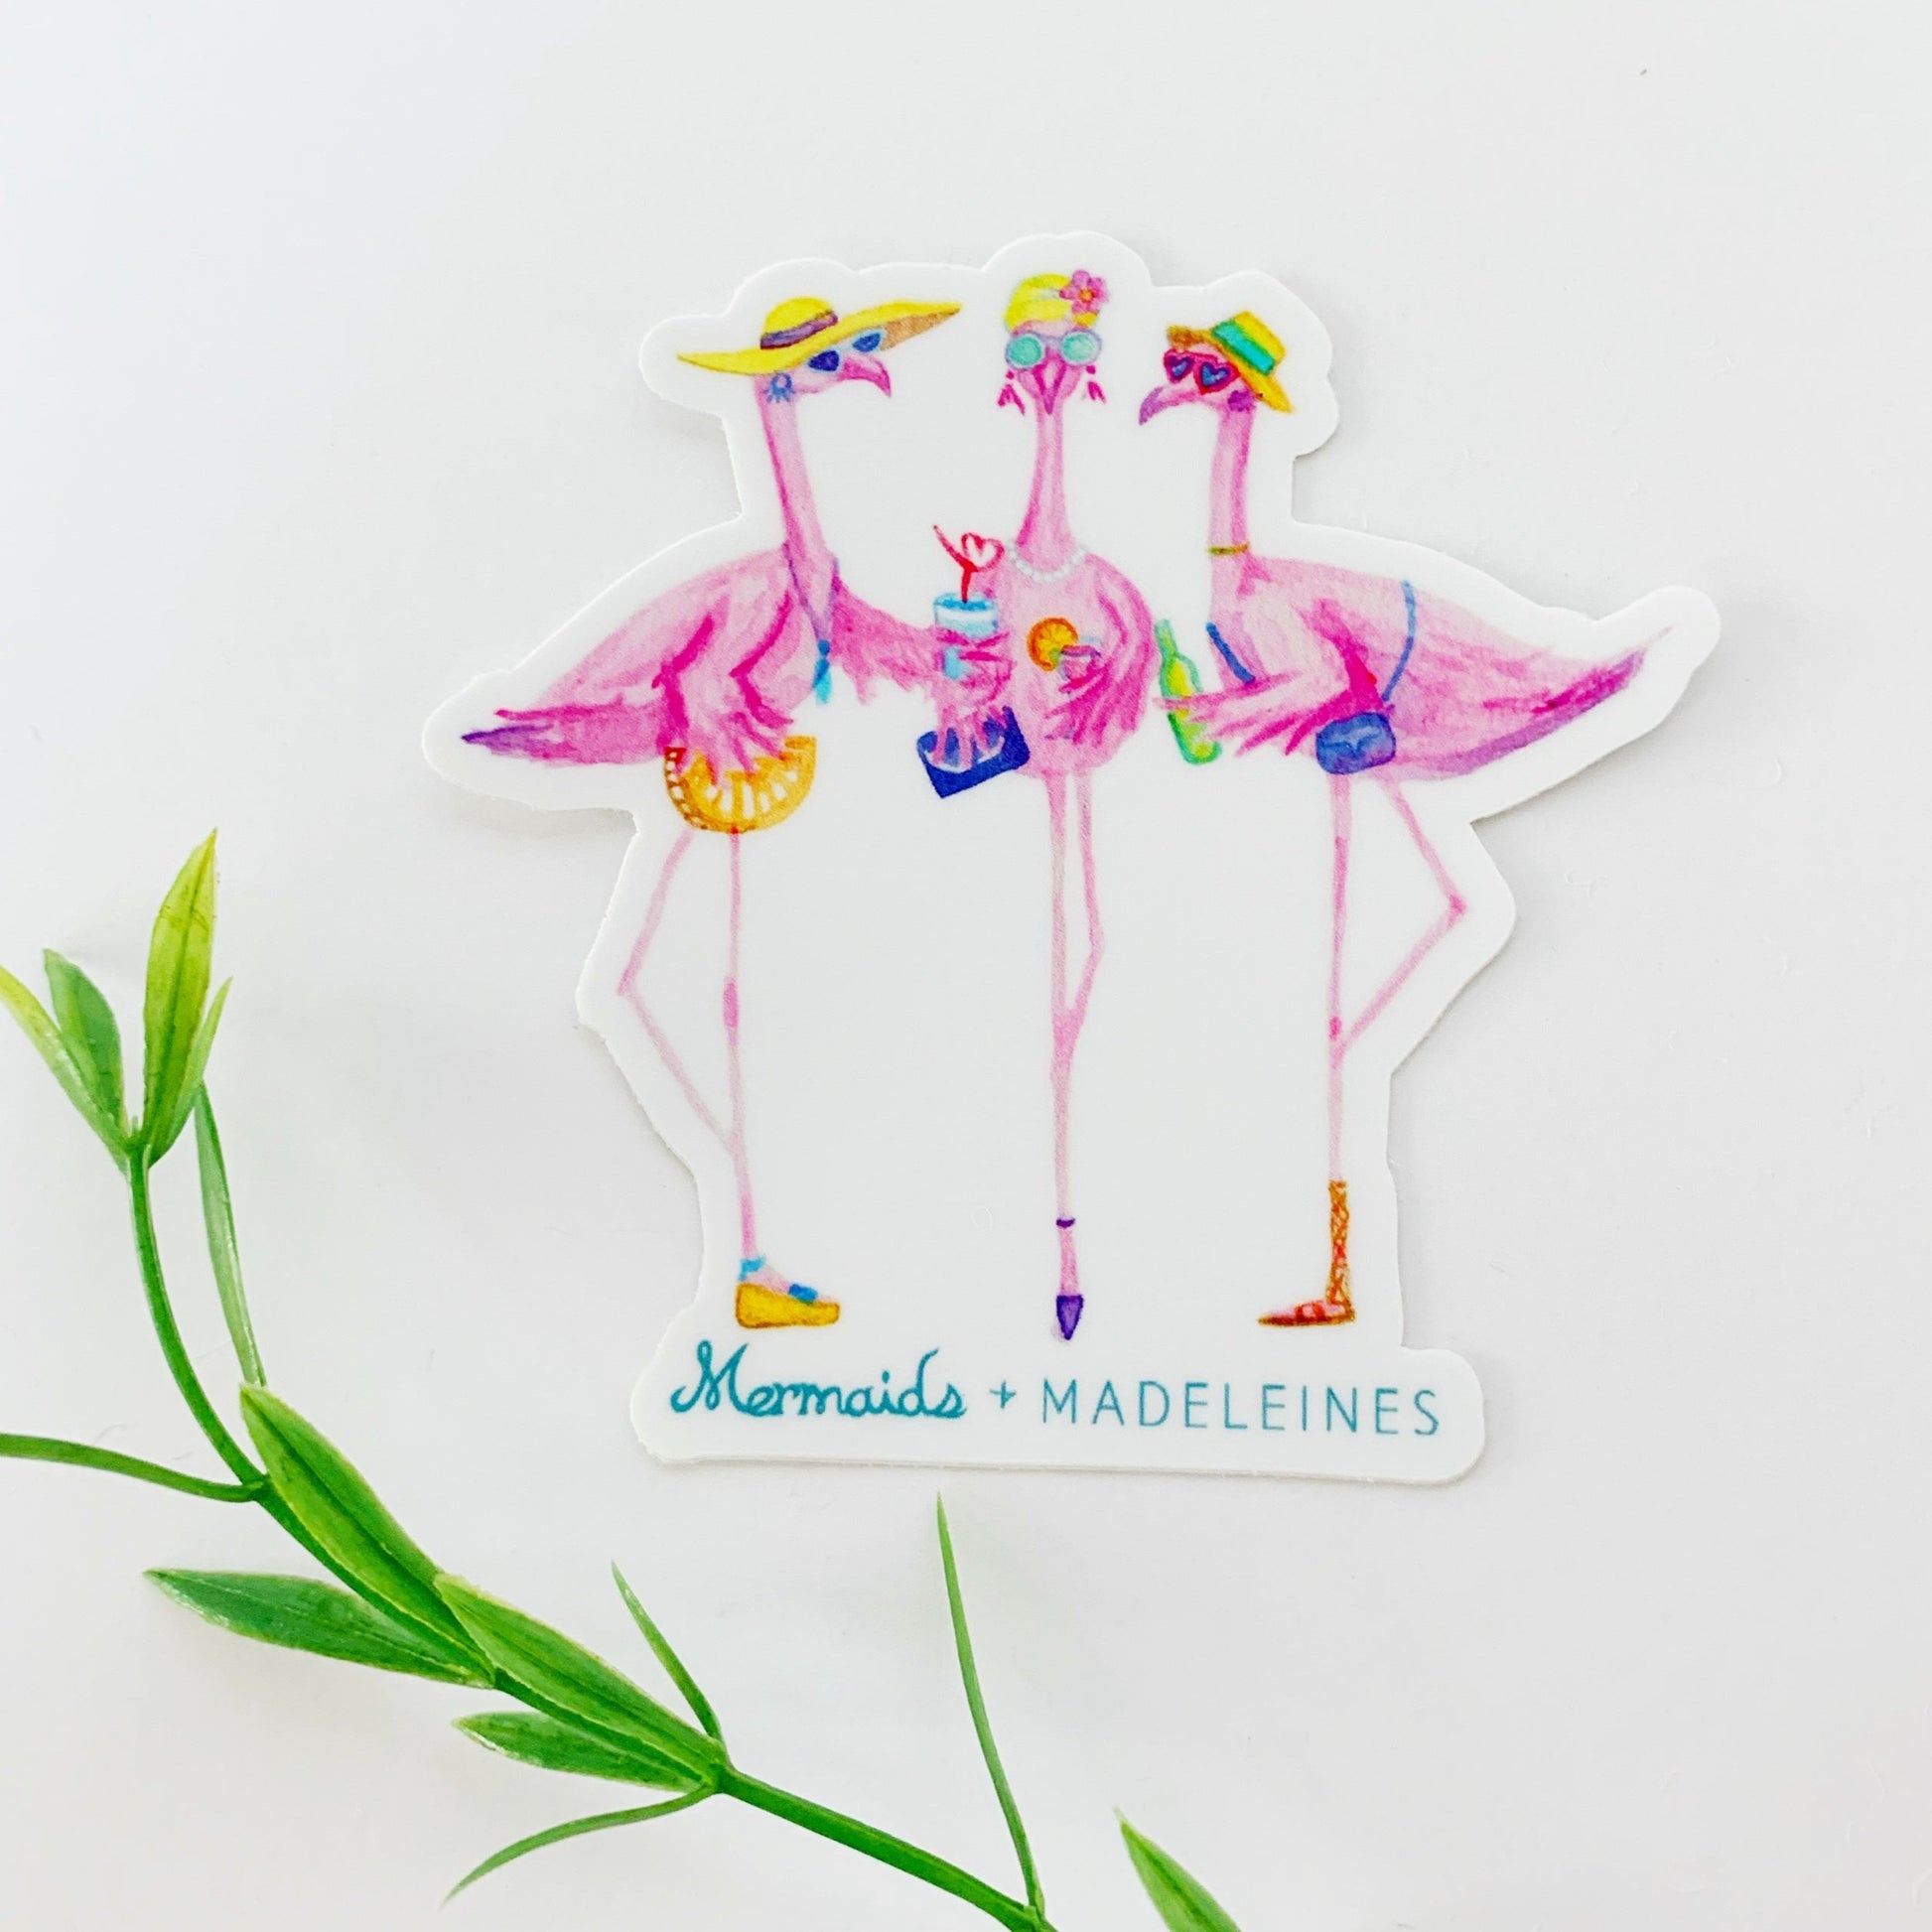 The flamingal sticker is created from original artwork made with acrylic paint and marker its 3 flamingo ladies dressed in summer hats and various footwear. This is a picture of a sticker on a white background with blurred greenery along the bottom of the picture